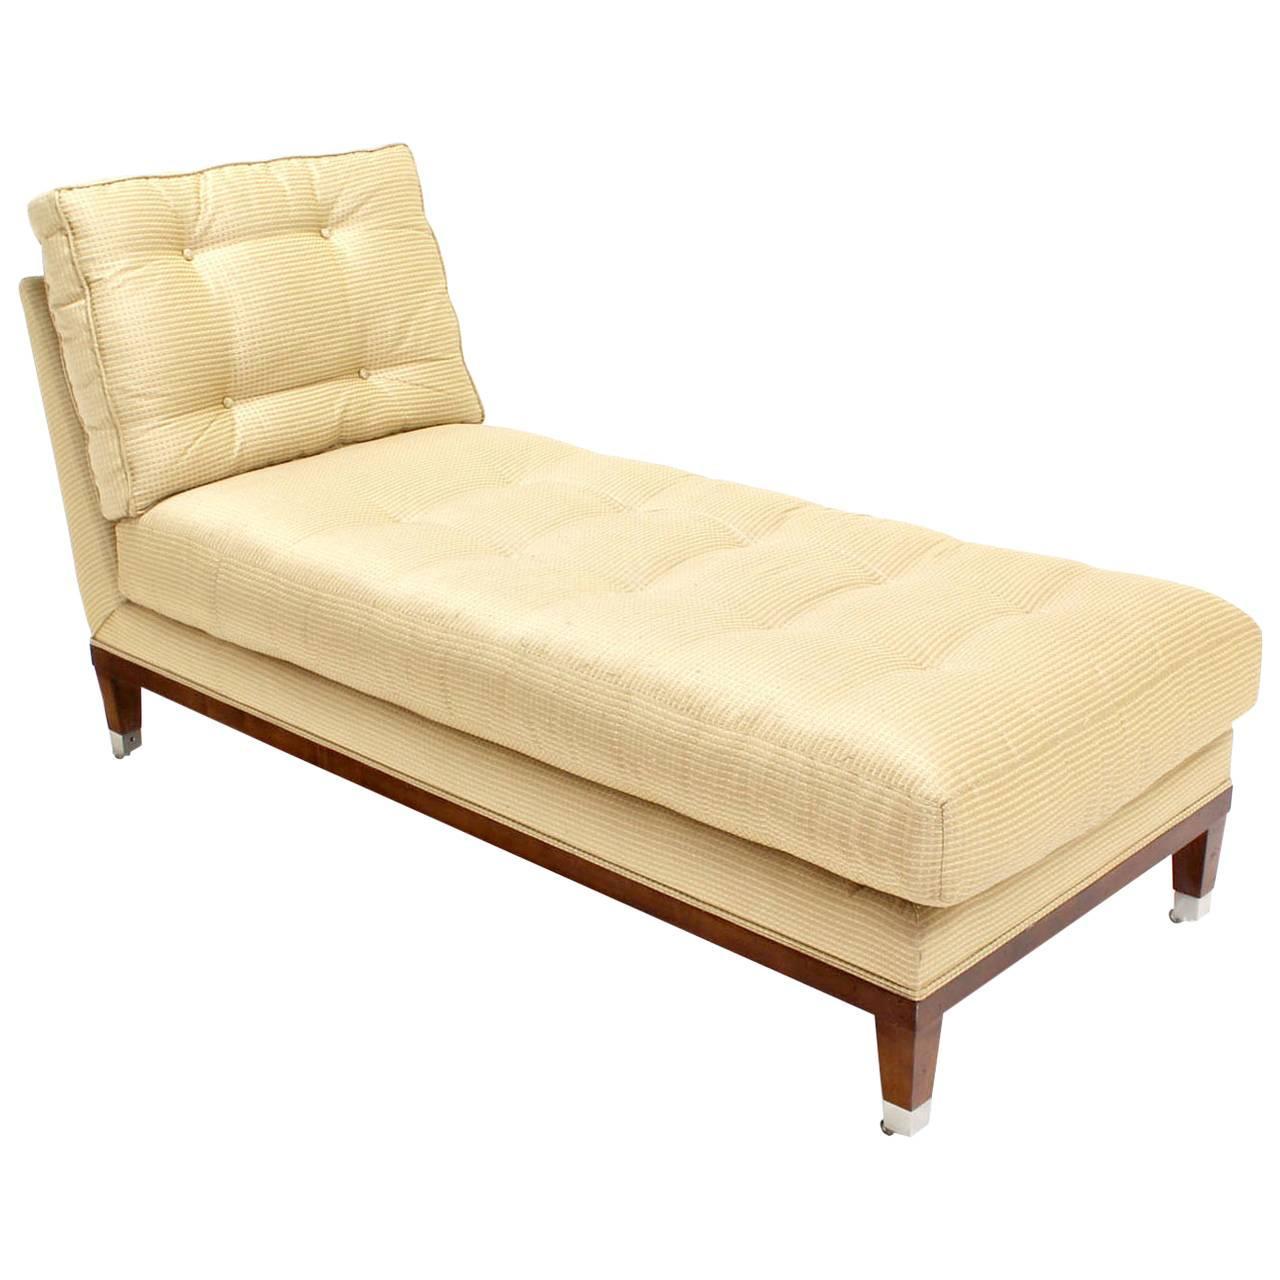 Modern Style Chaise Longue For Sale at 1stdibs